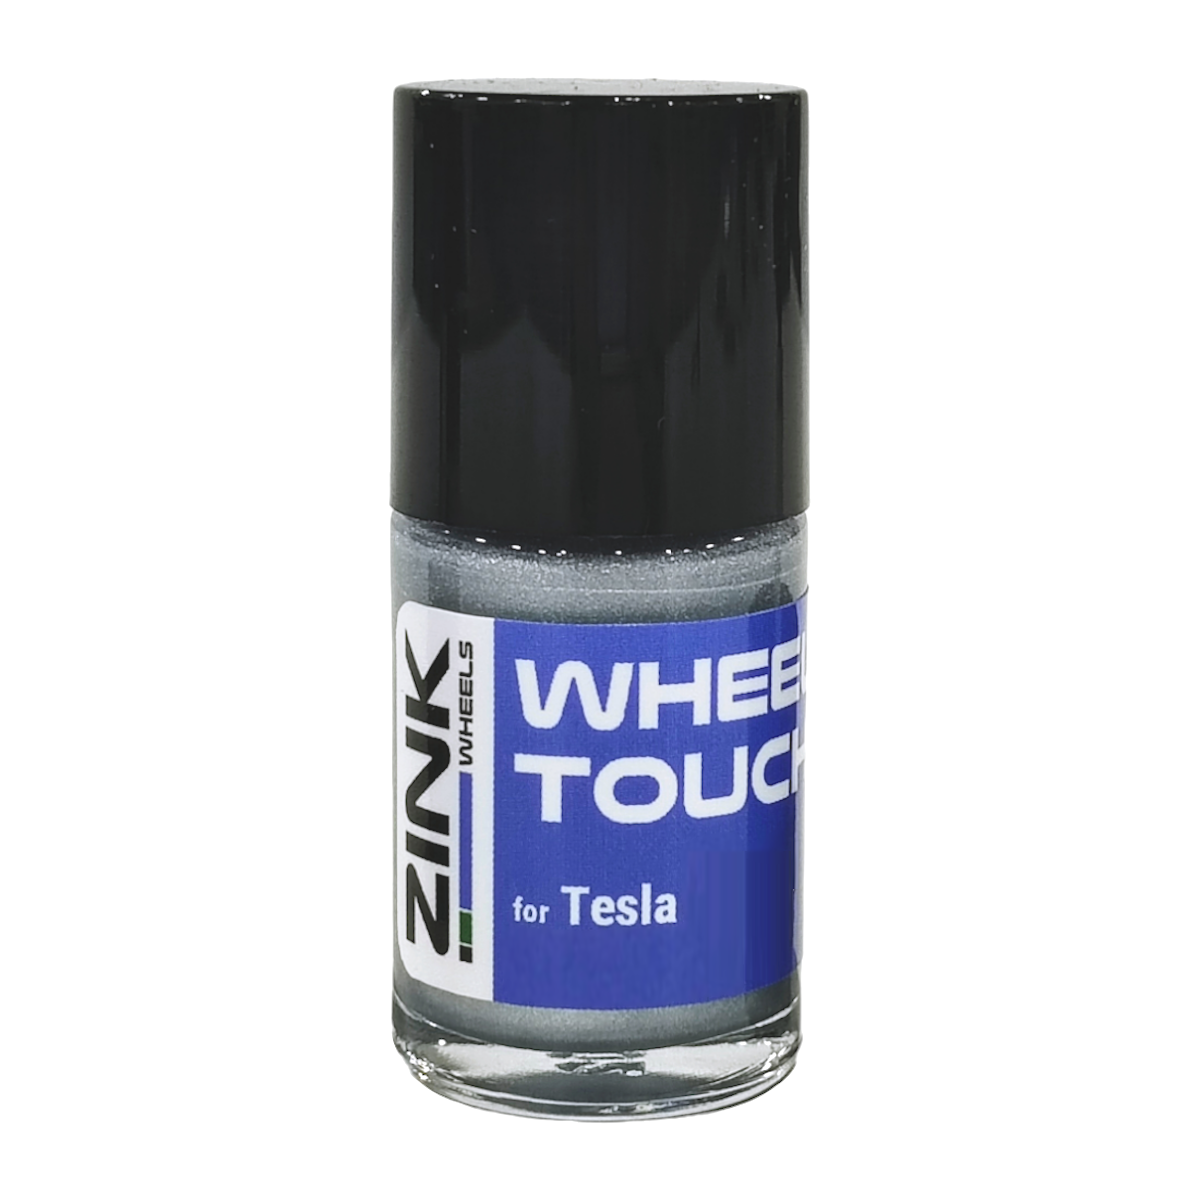 Tesla Wheel Curb Rash Repair Kit for Model X 19-inch Silver Cyclone Rims with Color-matched Touch-Up Paint